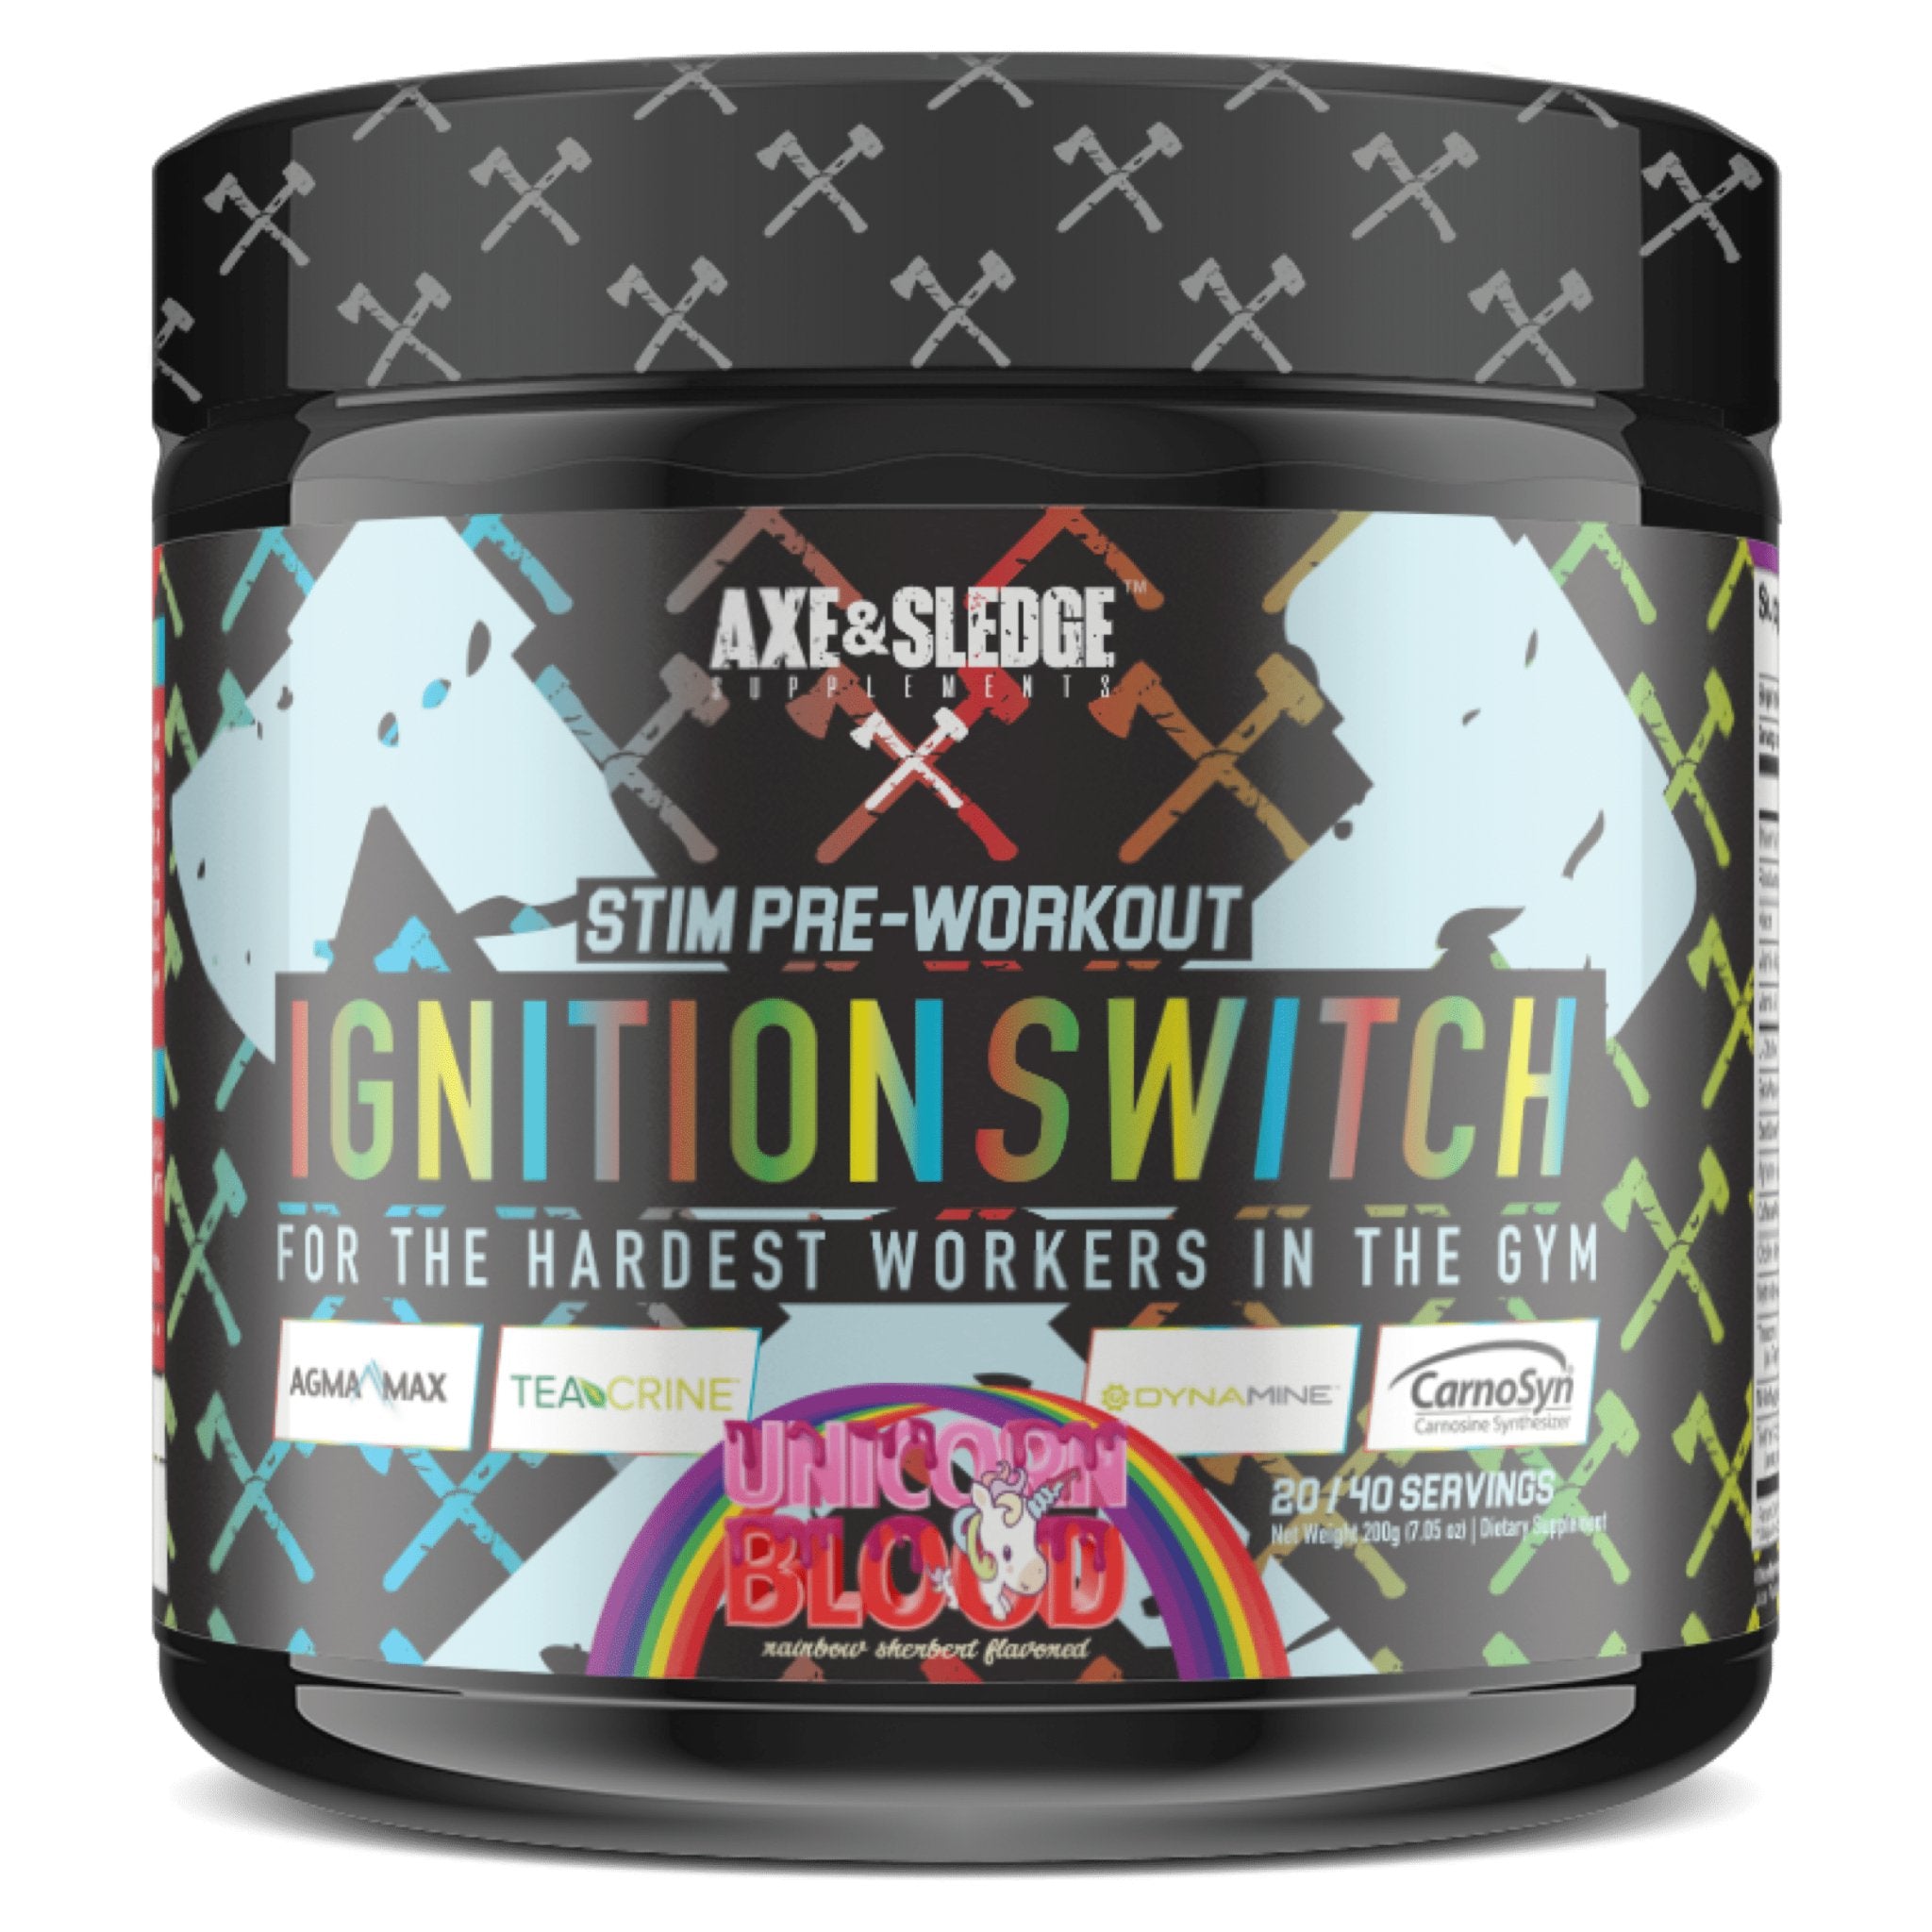 AXE & SLEDGEIGNITION SWITCHPre-WorkoutRED SUPPS